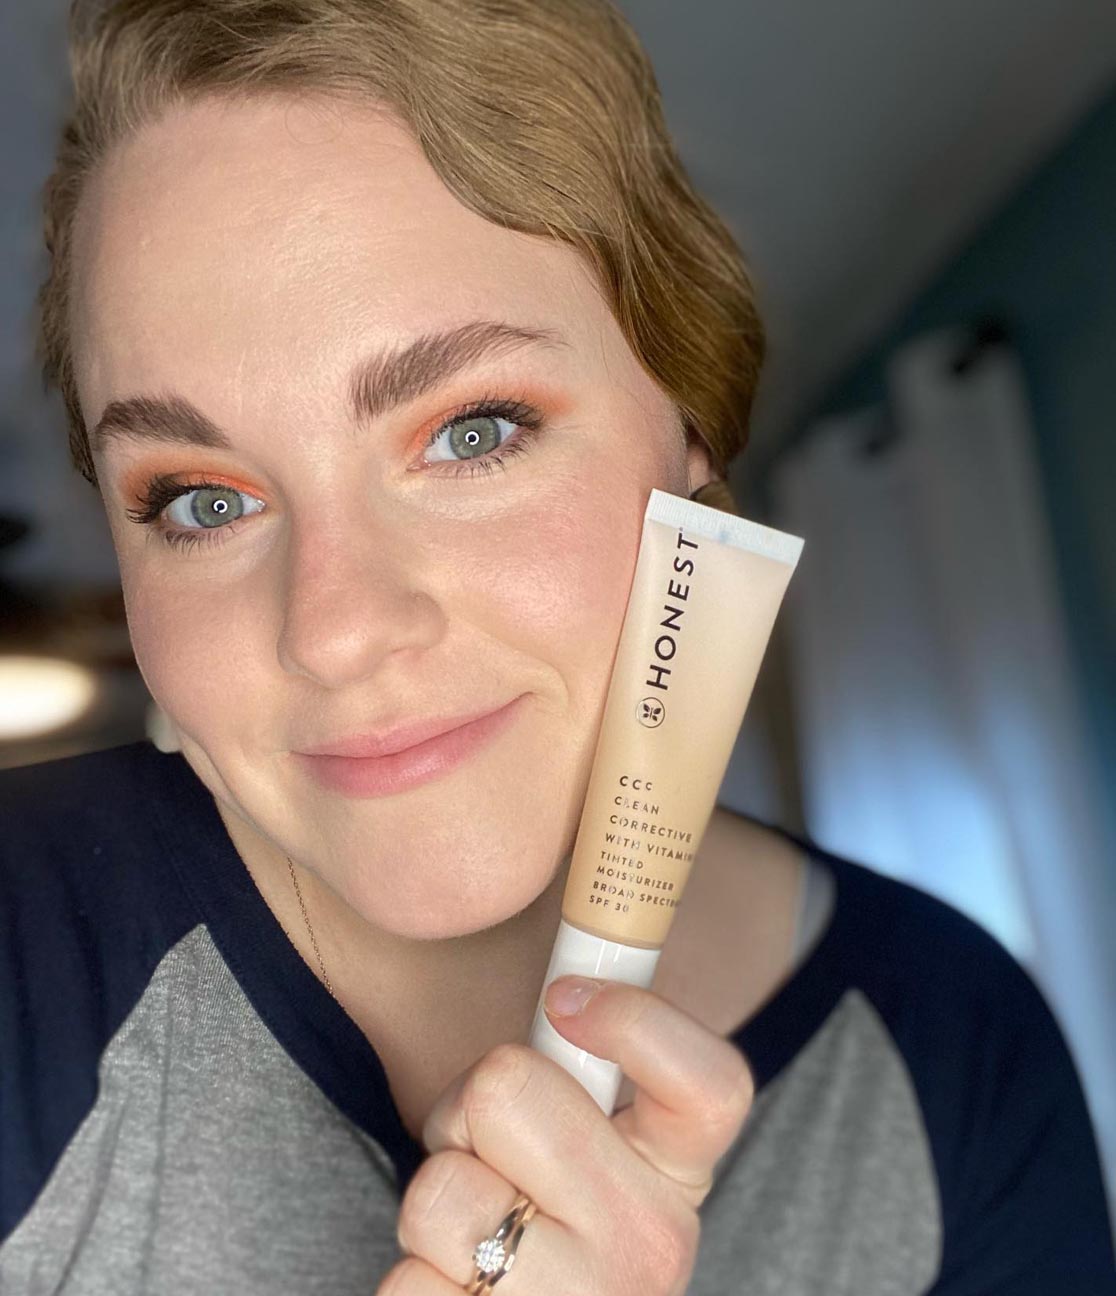 BB vs. CC Cream: What's the Difference? – purlisse